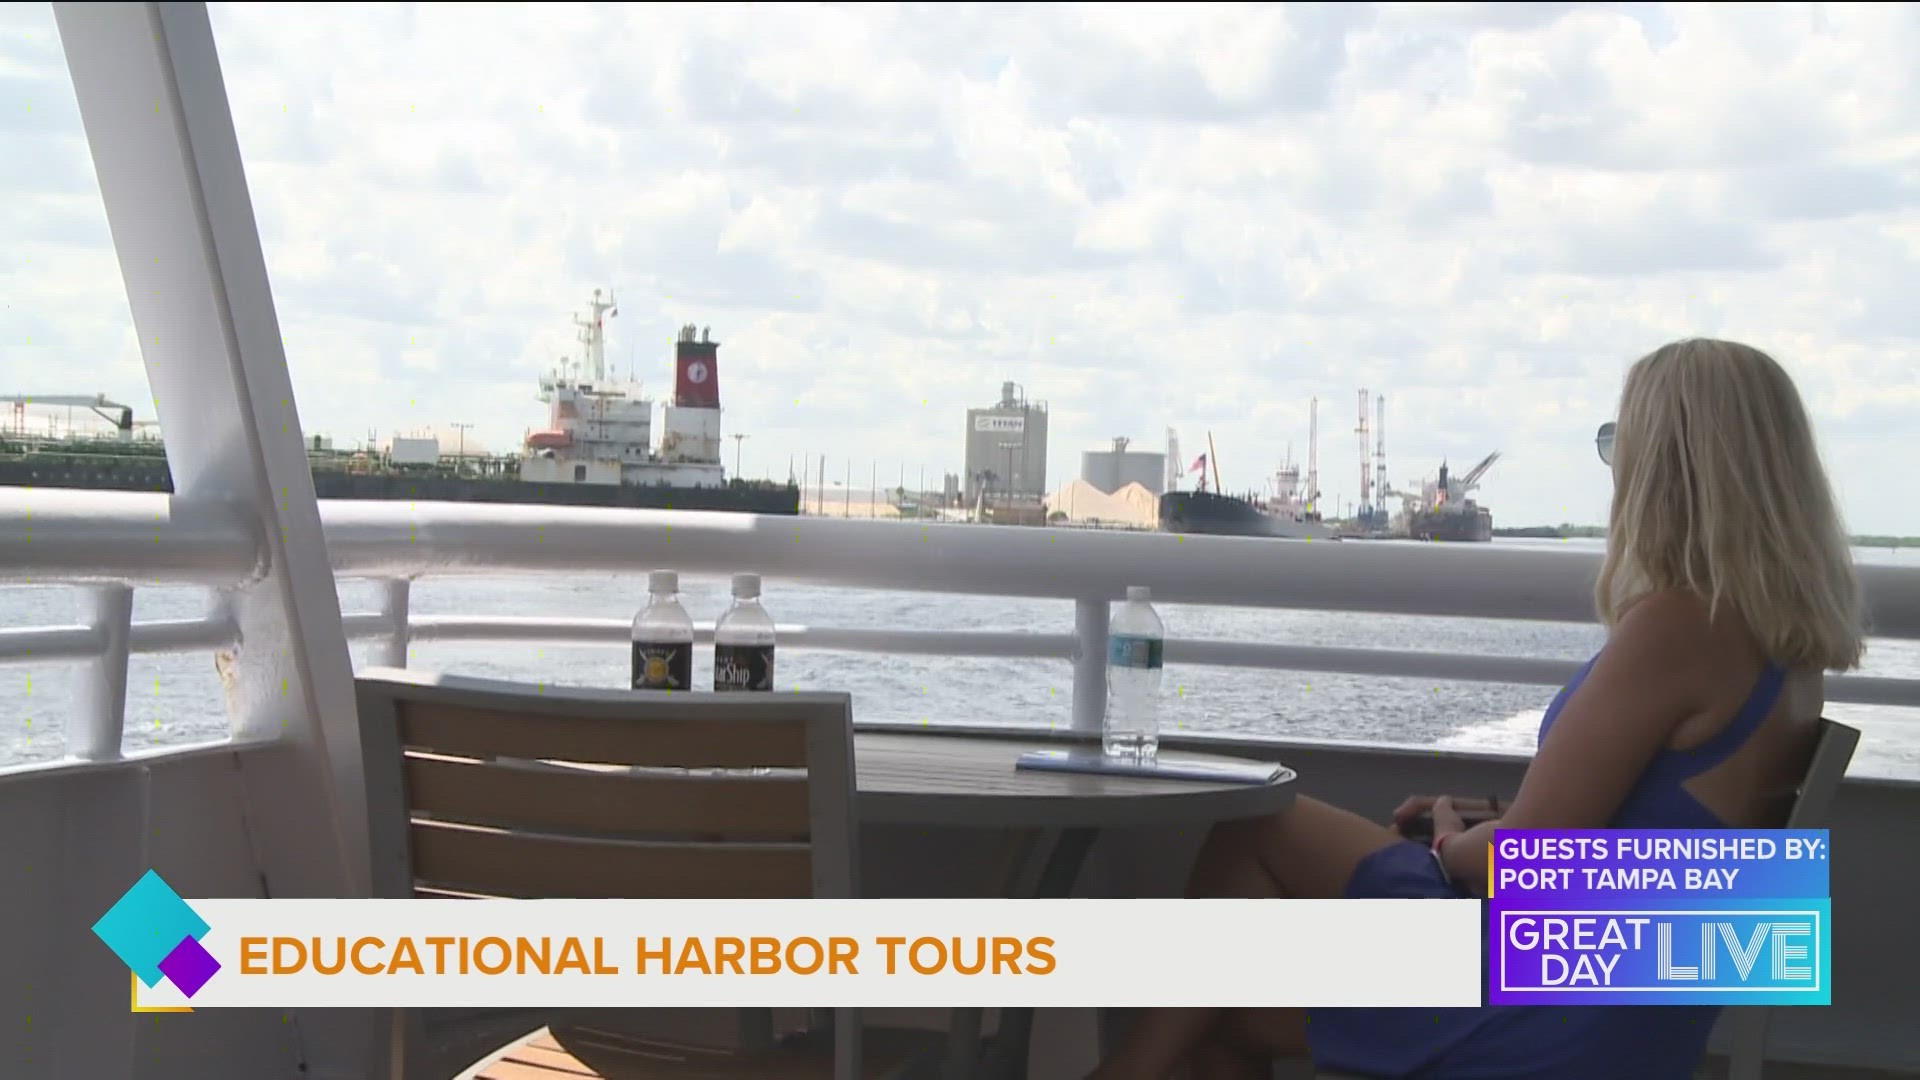 Port Tampa Bay hosts educational harbor tours that are completely free.